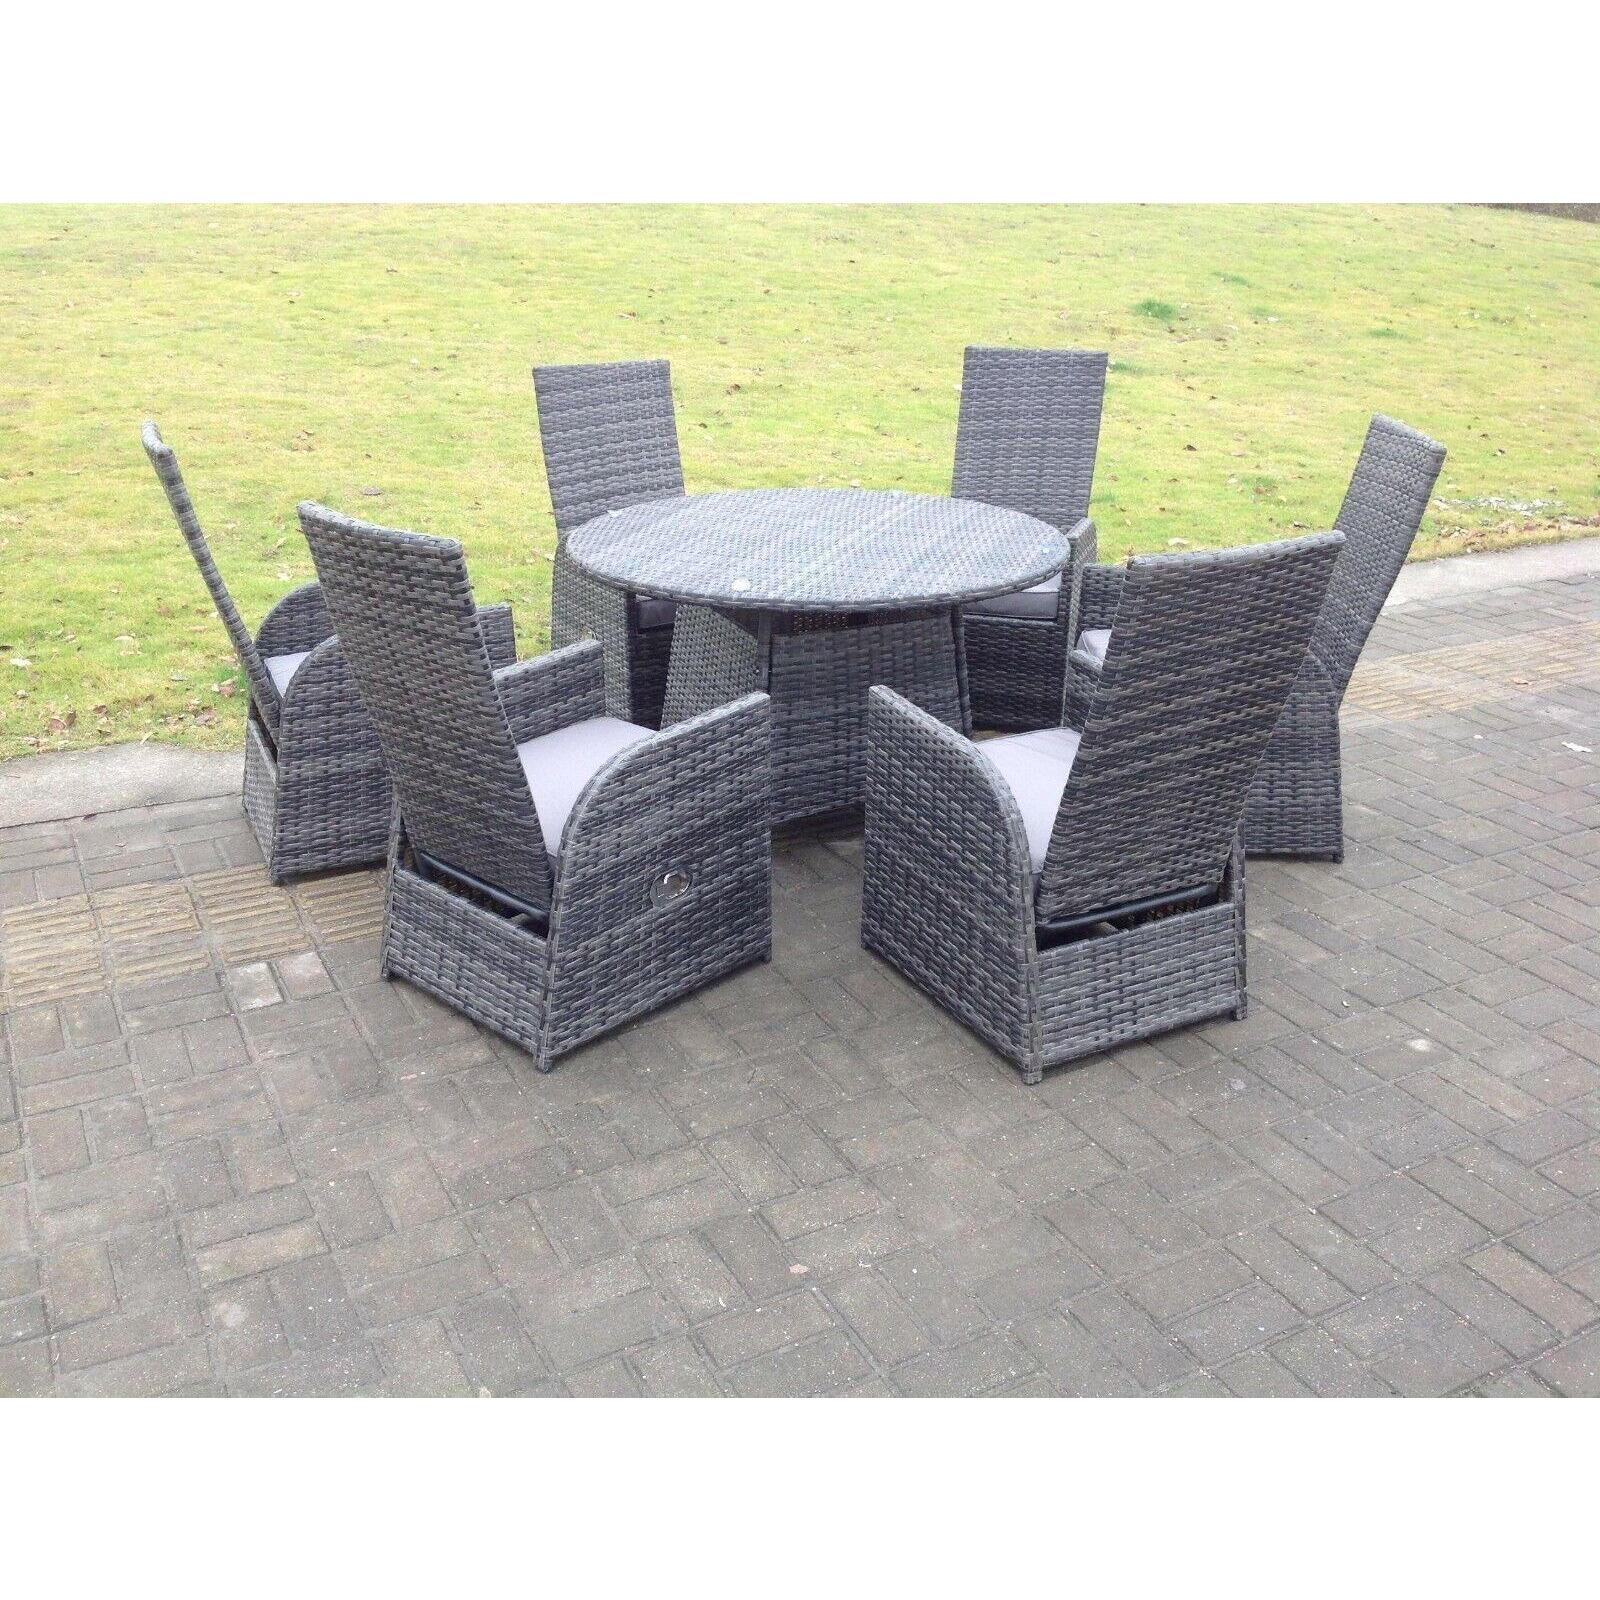 Outdoor Wicker Rattan Garden Furniture Reclining Chair And Table Dining Sets 6 Seater Round Table - image 1